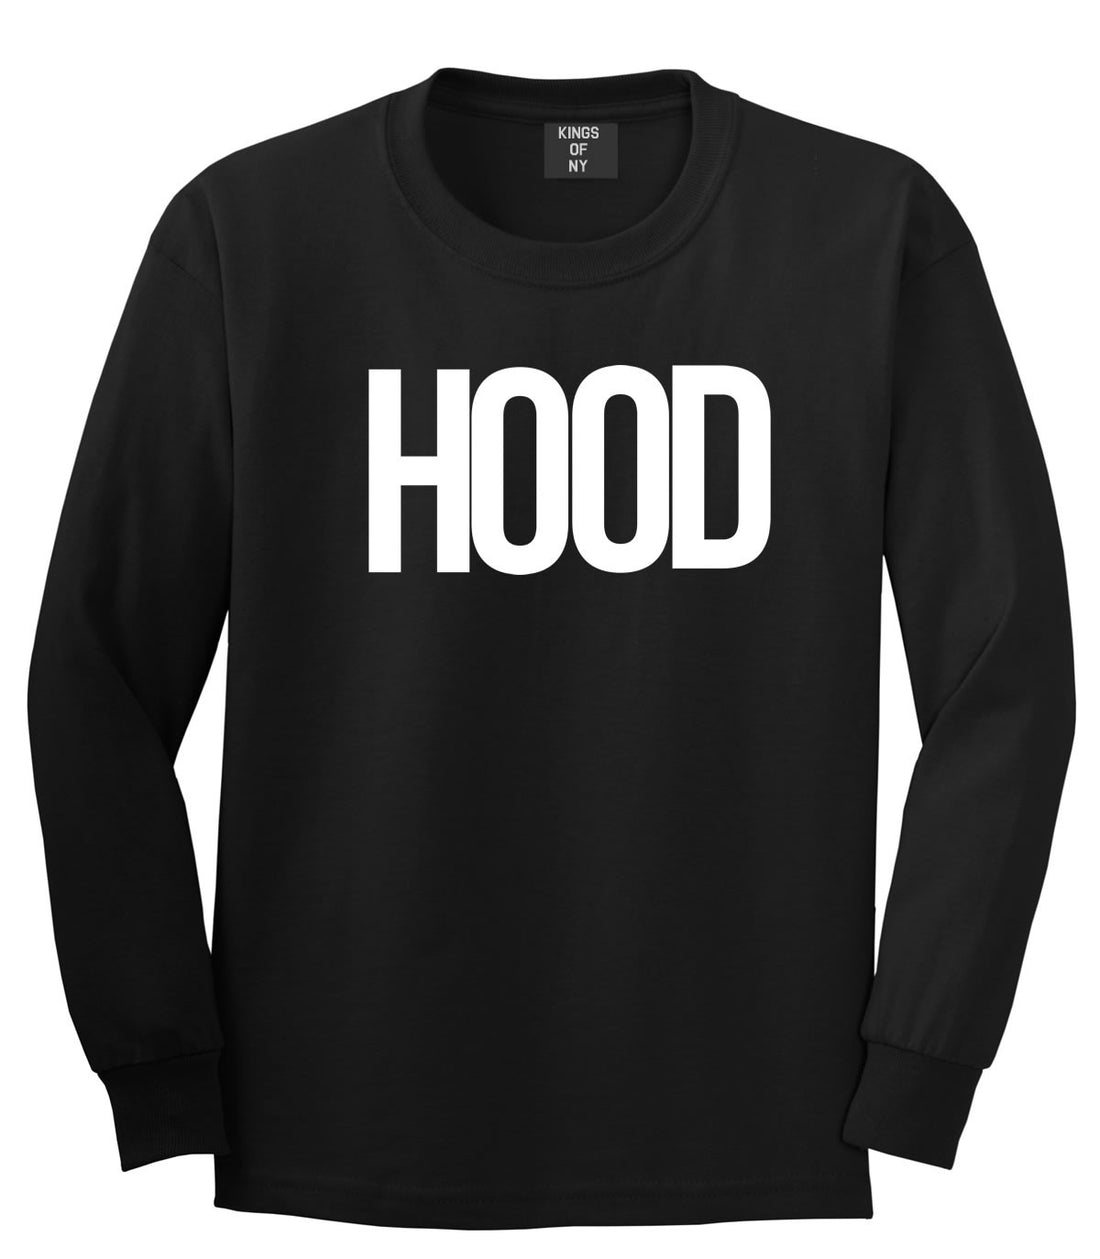 Hood Trap Style Compton New York Air Long Sleeve T-Shirt In Black by Kings Of NY